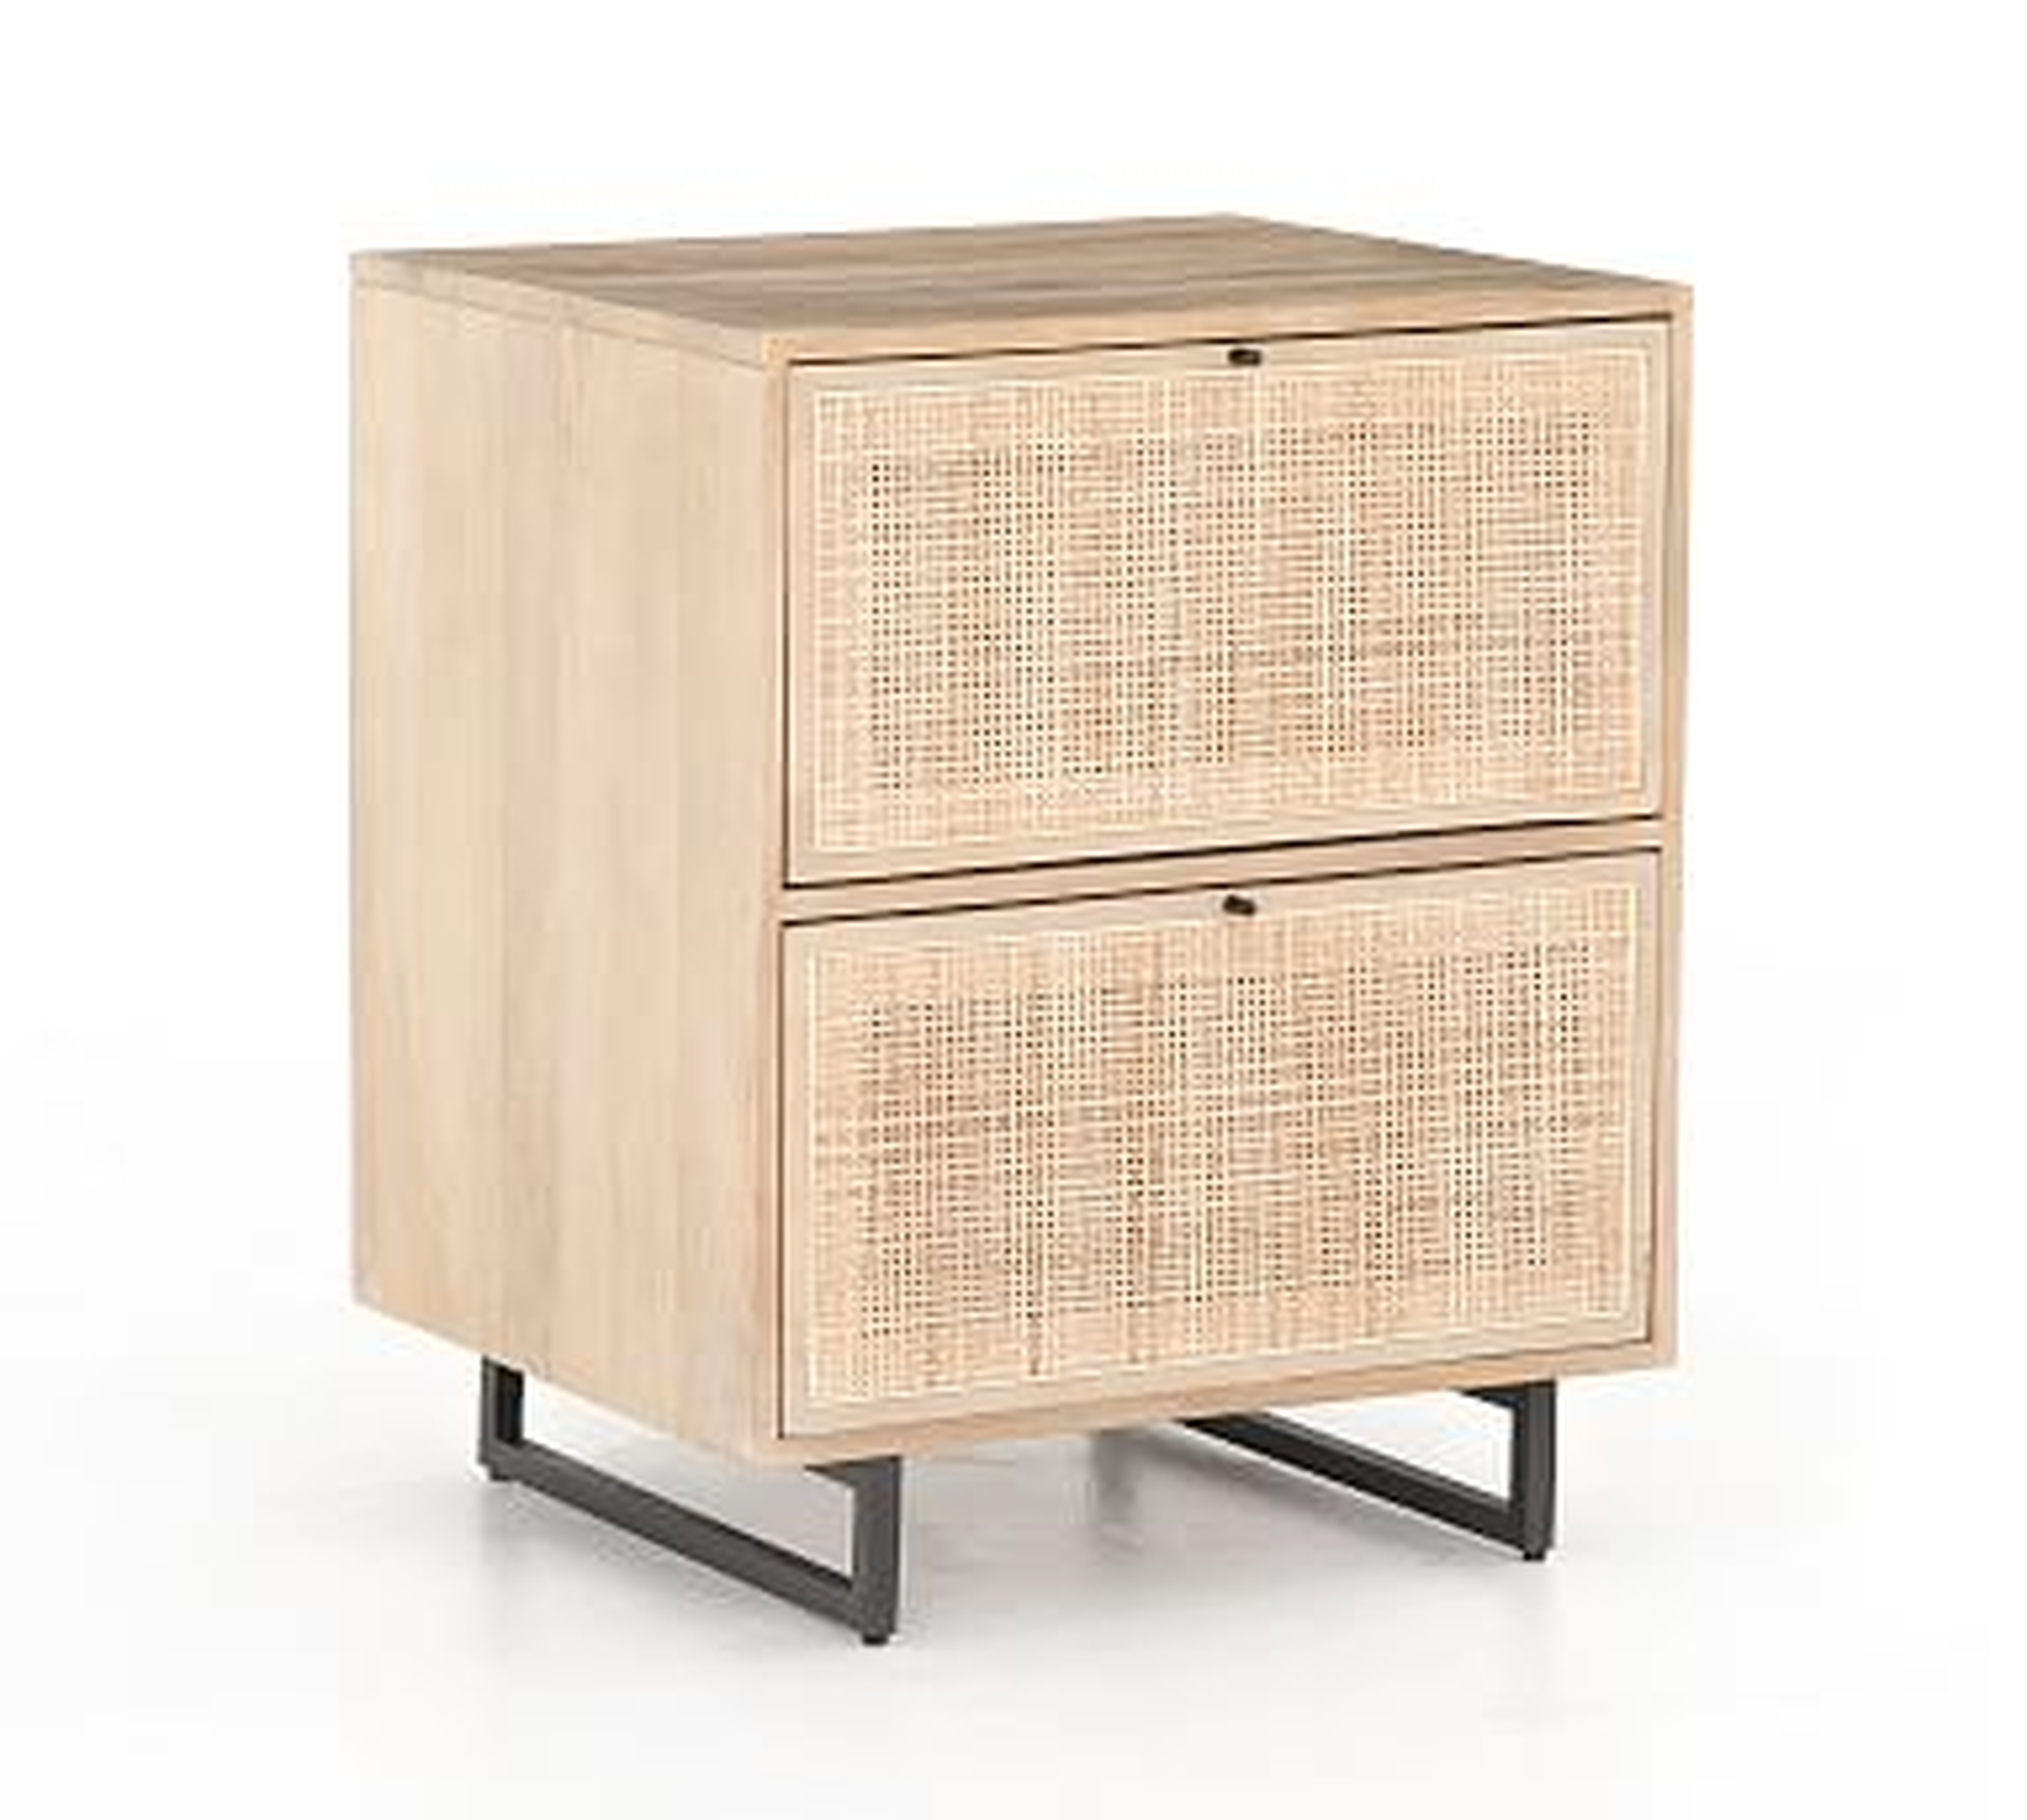 Dolores 23" Cane 2-Drawer Vertical File Cabinet, Natural - Pottery Barn